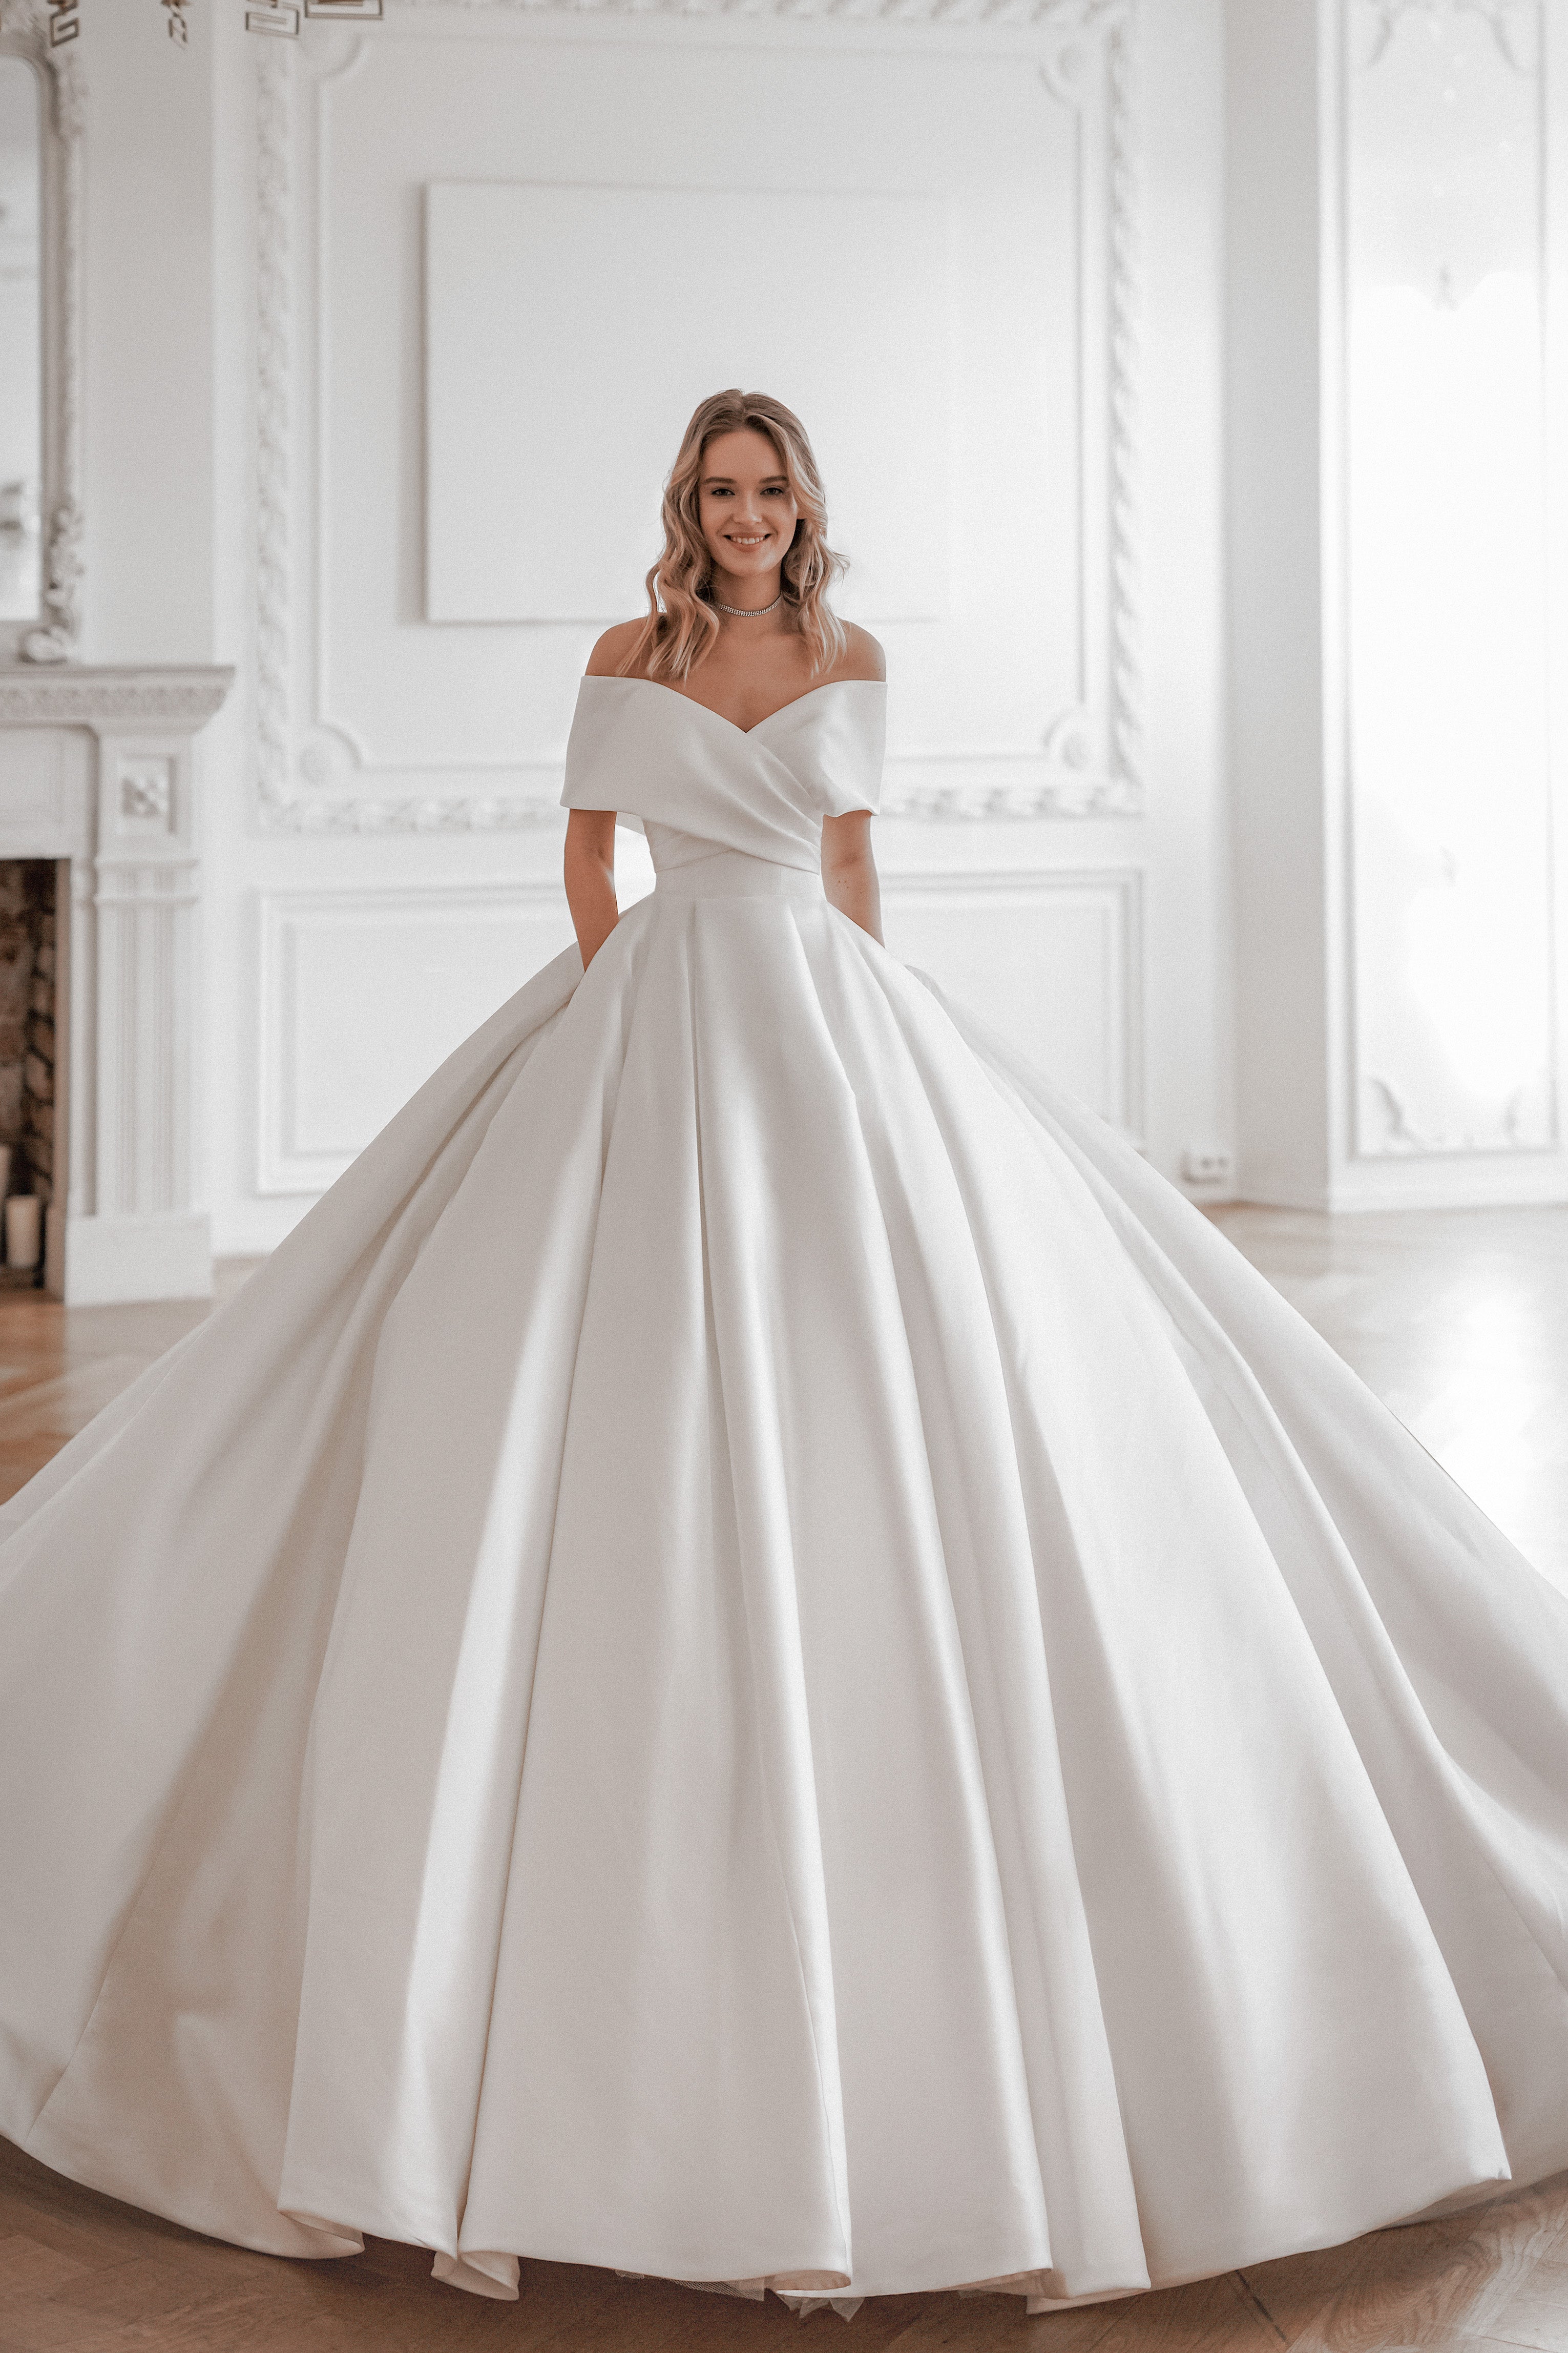 Say hello to your dream wedding dress from Mak Tumang featuring a classic  silhouette and beautiful lavish detailing! | Popular wedding dresses,  Latest wedding gowns, Bridal dresses